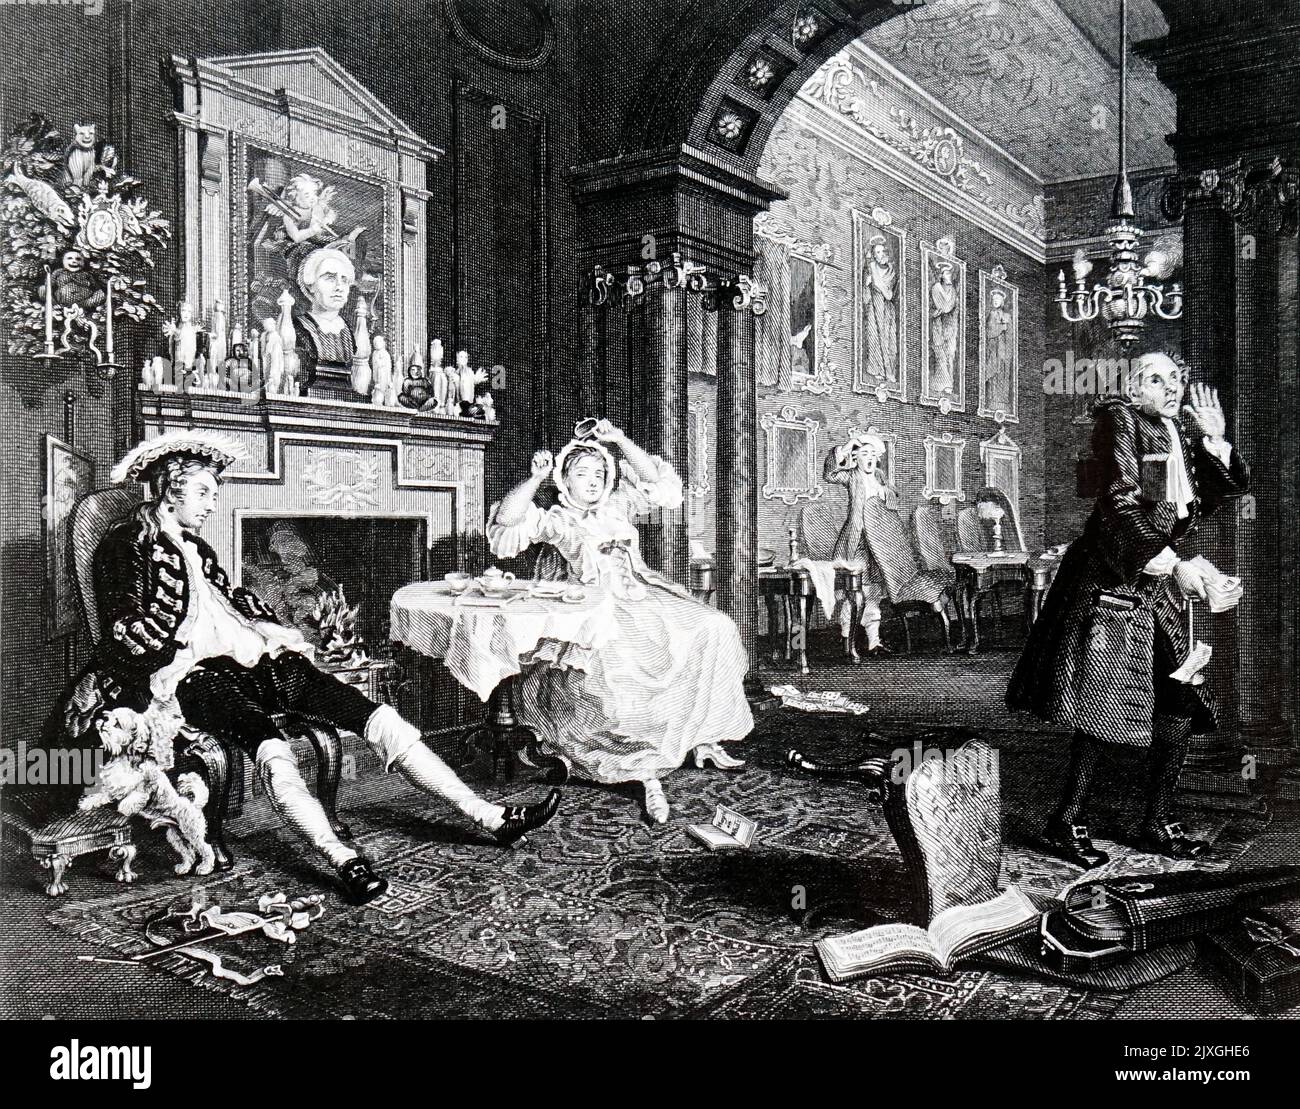 Engraving titled 'Marriage a-la-mode' depicting a breakfast scene. Dated 18th Century Stock Photo